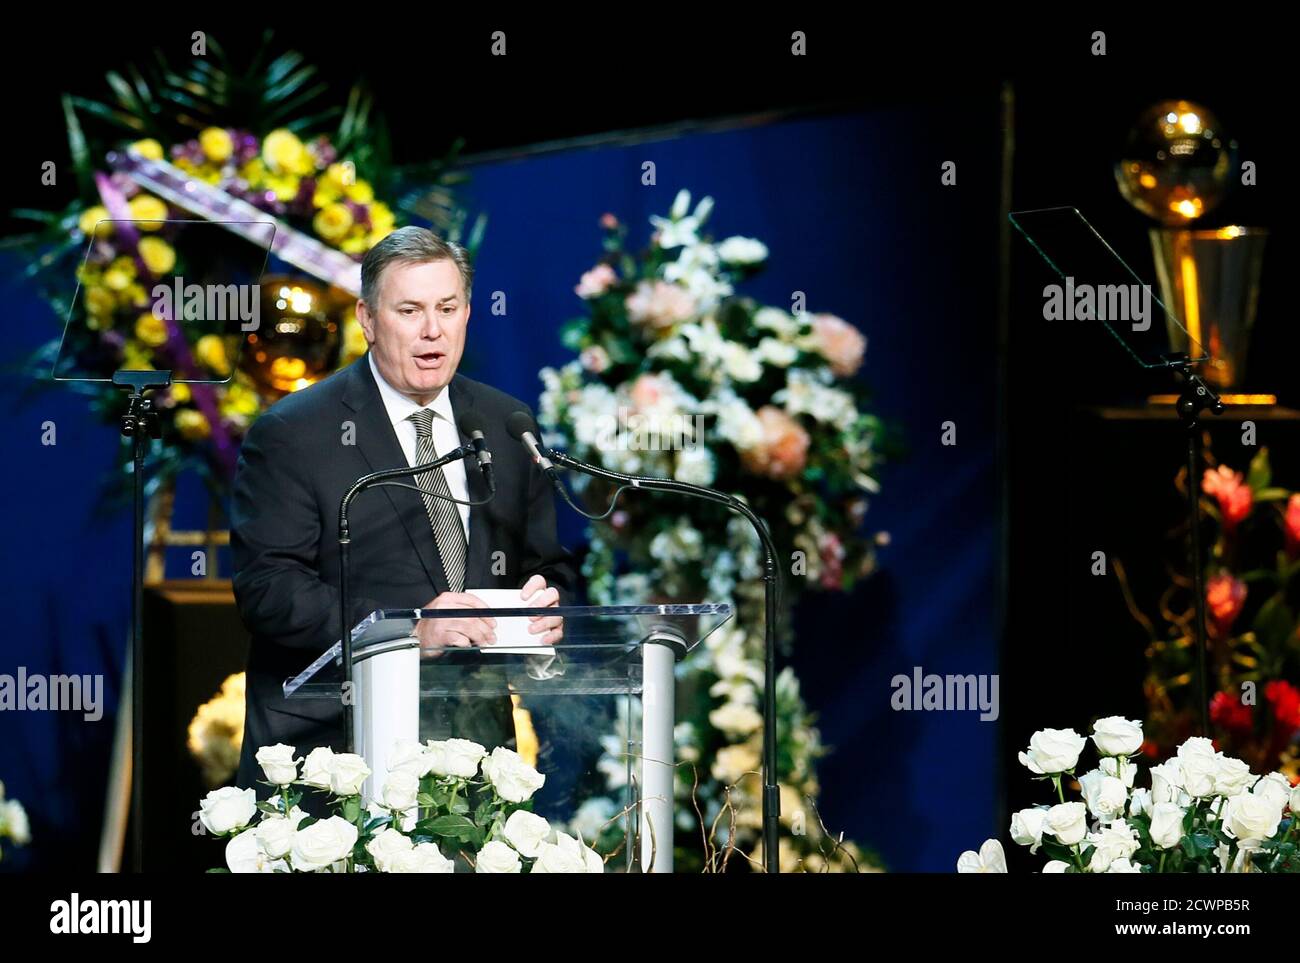 Anschutz Entertainment Group (AEG) President & CEO Tim Leiweke speaks at a memorial service for the late Los Angeles Lakers owner Jerry Buss in Los Angeles, February 21, 2013. Buss, who parlayed a $1,000 real estate investment into ownership of the Los Angeles Lakers, winning 10 National Basketball Association championships and making the team one of the most glamorous in American sports, died on Monday at 80, the team said on its official website. REUTERS/Lucy Nicholson (UNITED STATES - Tags: SPORT BASKETBALL OBITUARY) Stock Photo